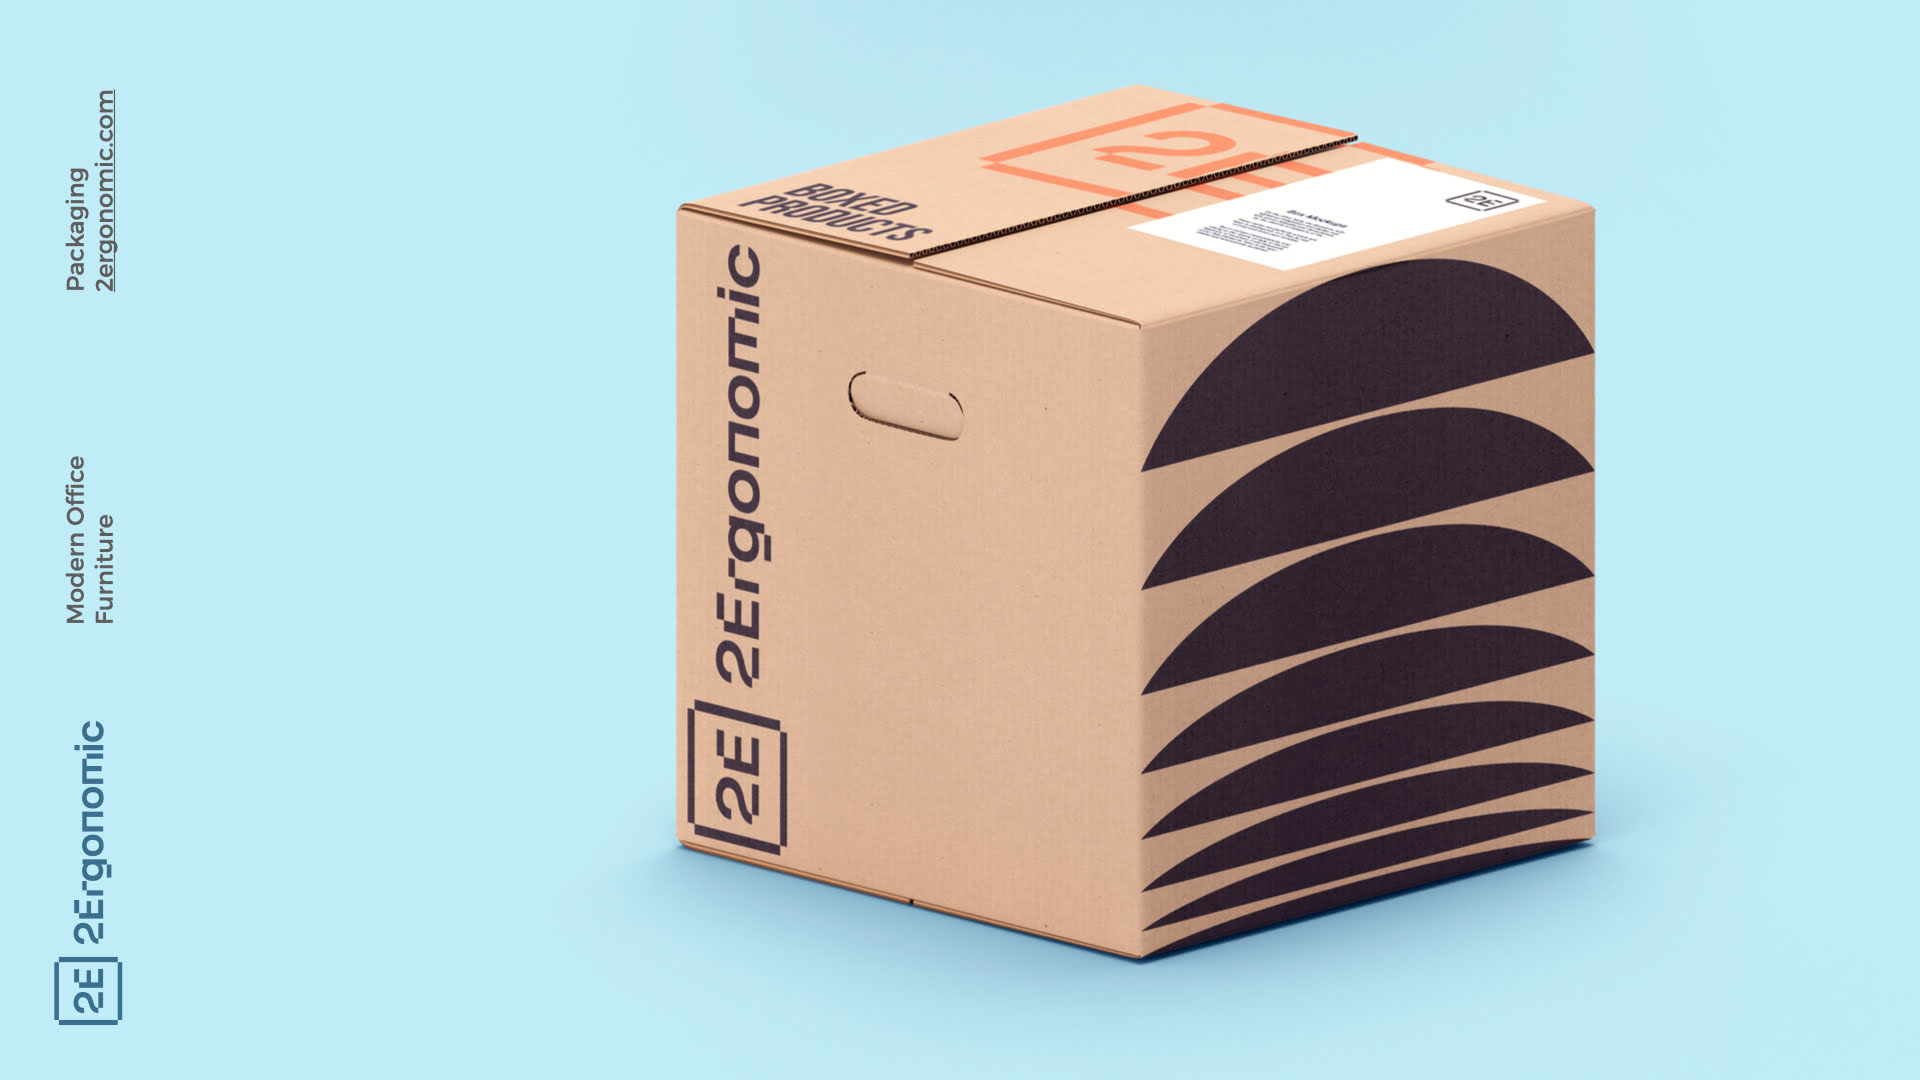 2Ergo packaging style